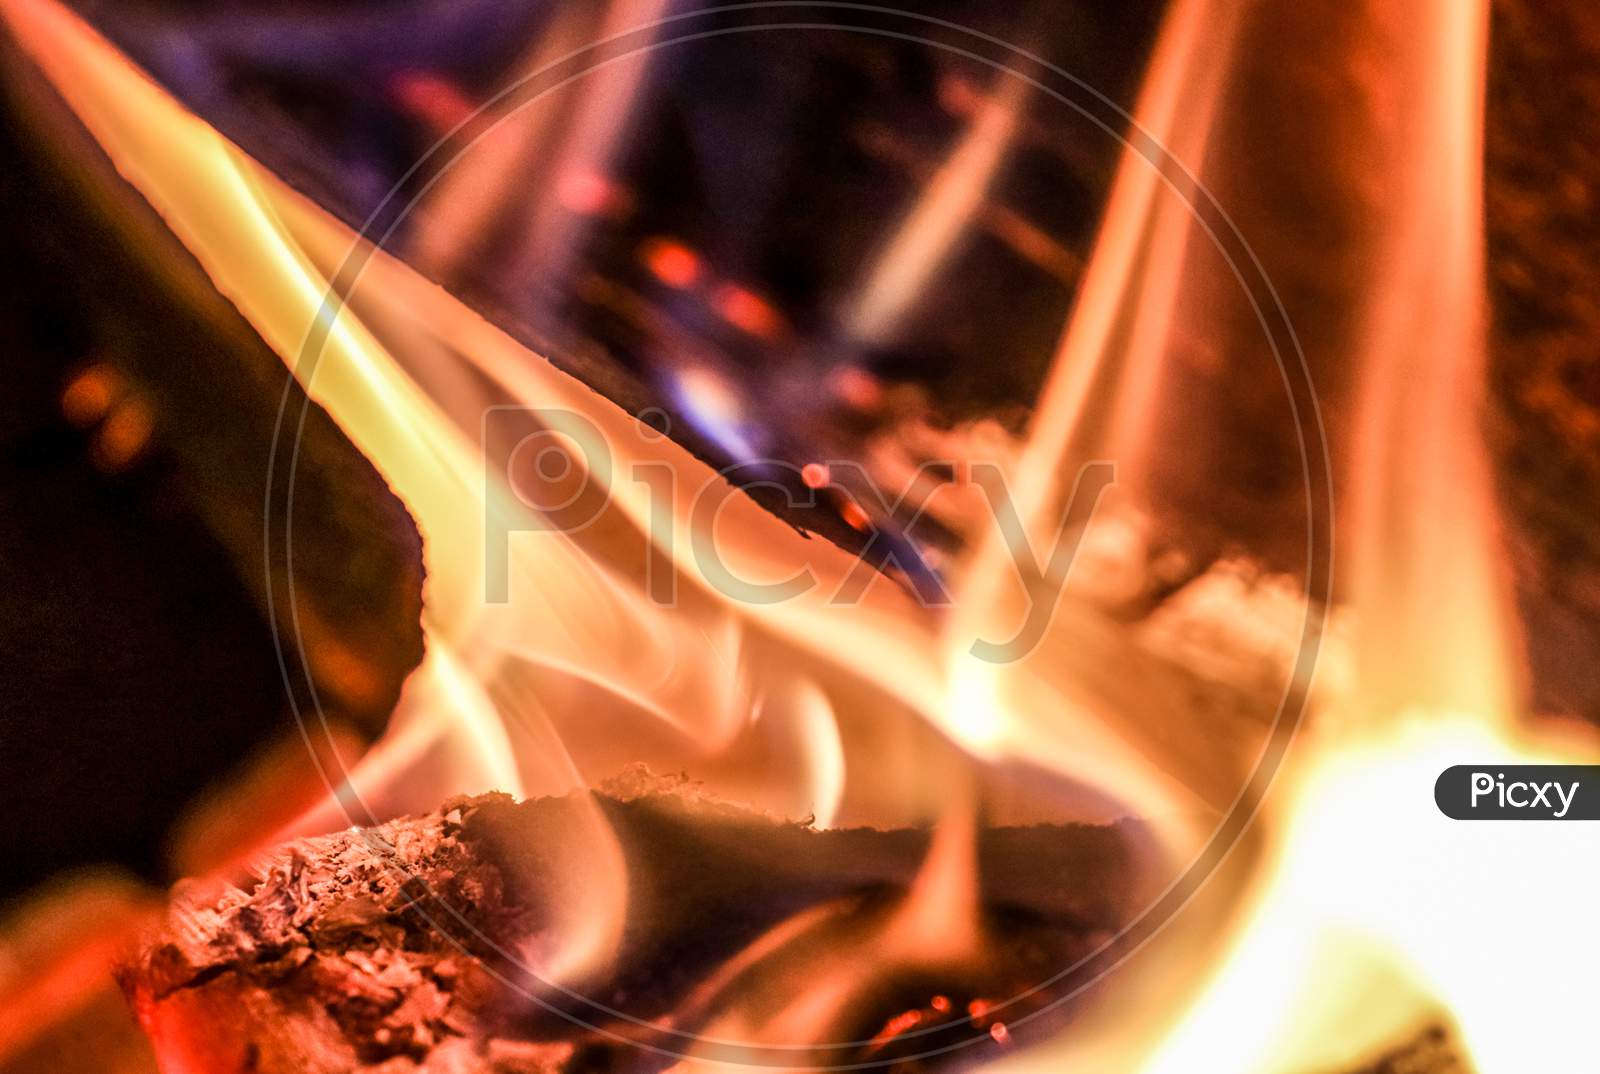 Close up of a hot burning fireplace with flames and glowing ember